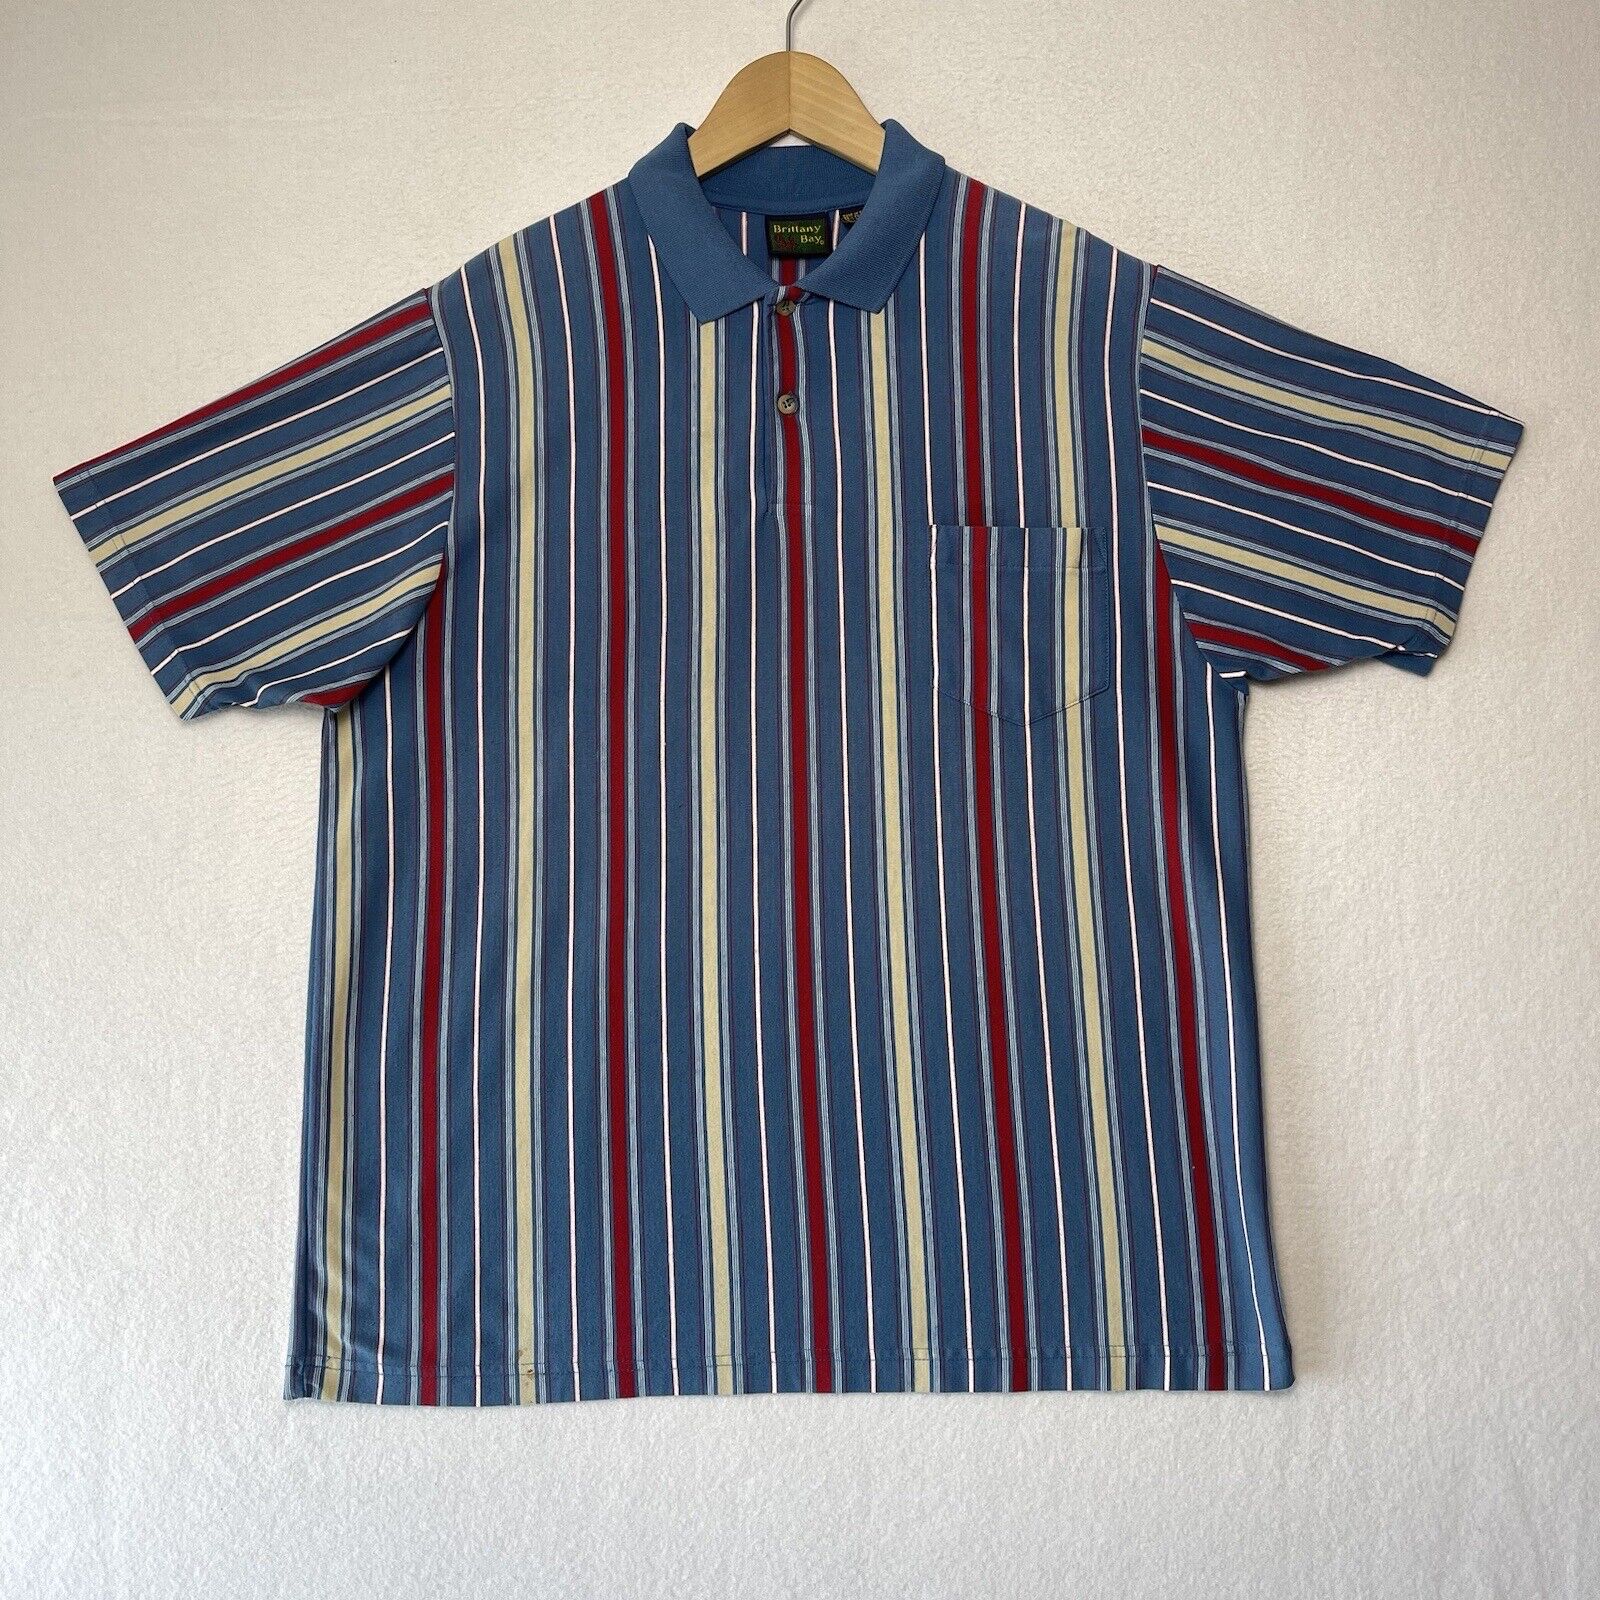 Vintage Brittany Bay Golf Polo Shirt Striped Multicolor Men’s Size XL Casual